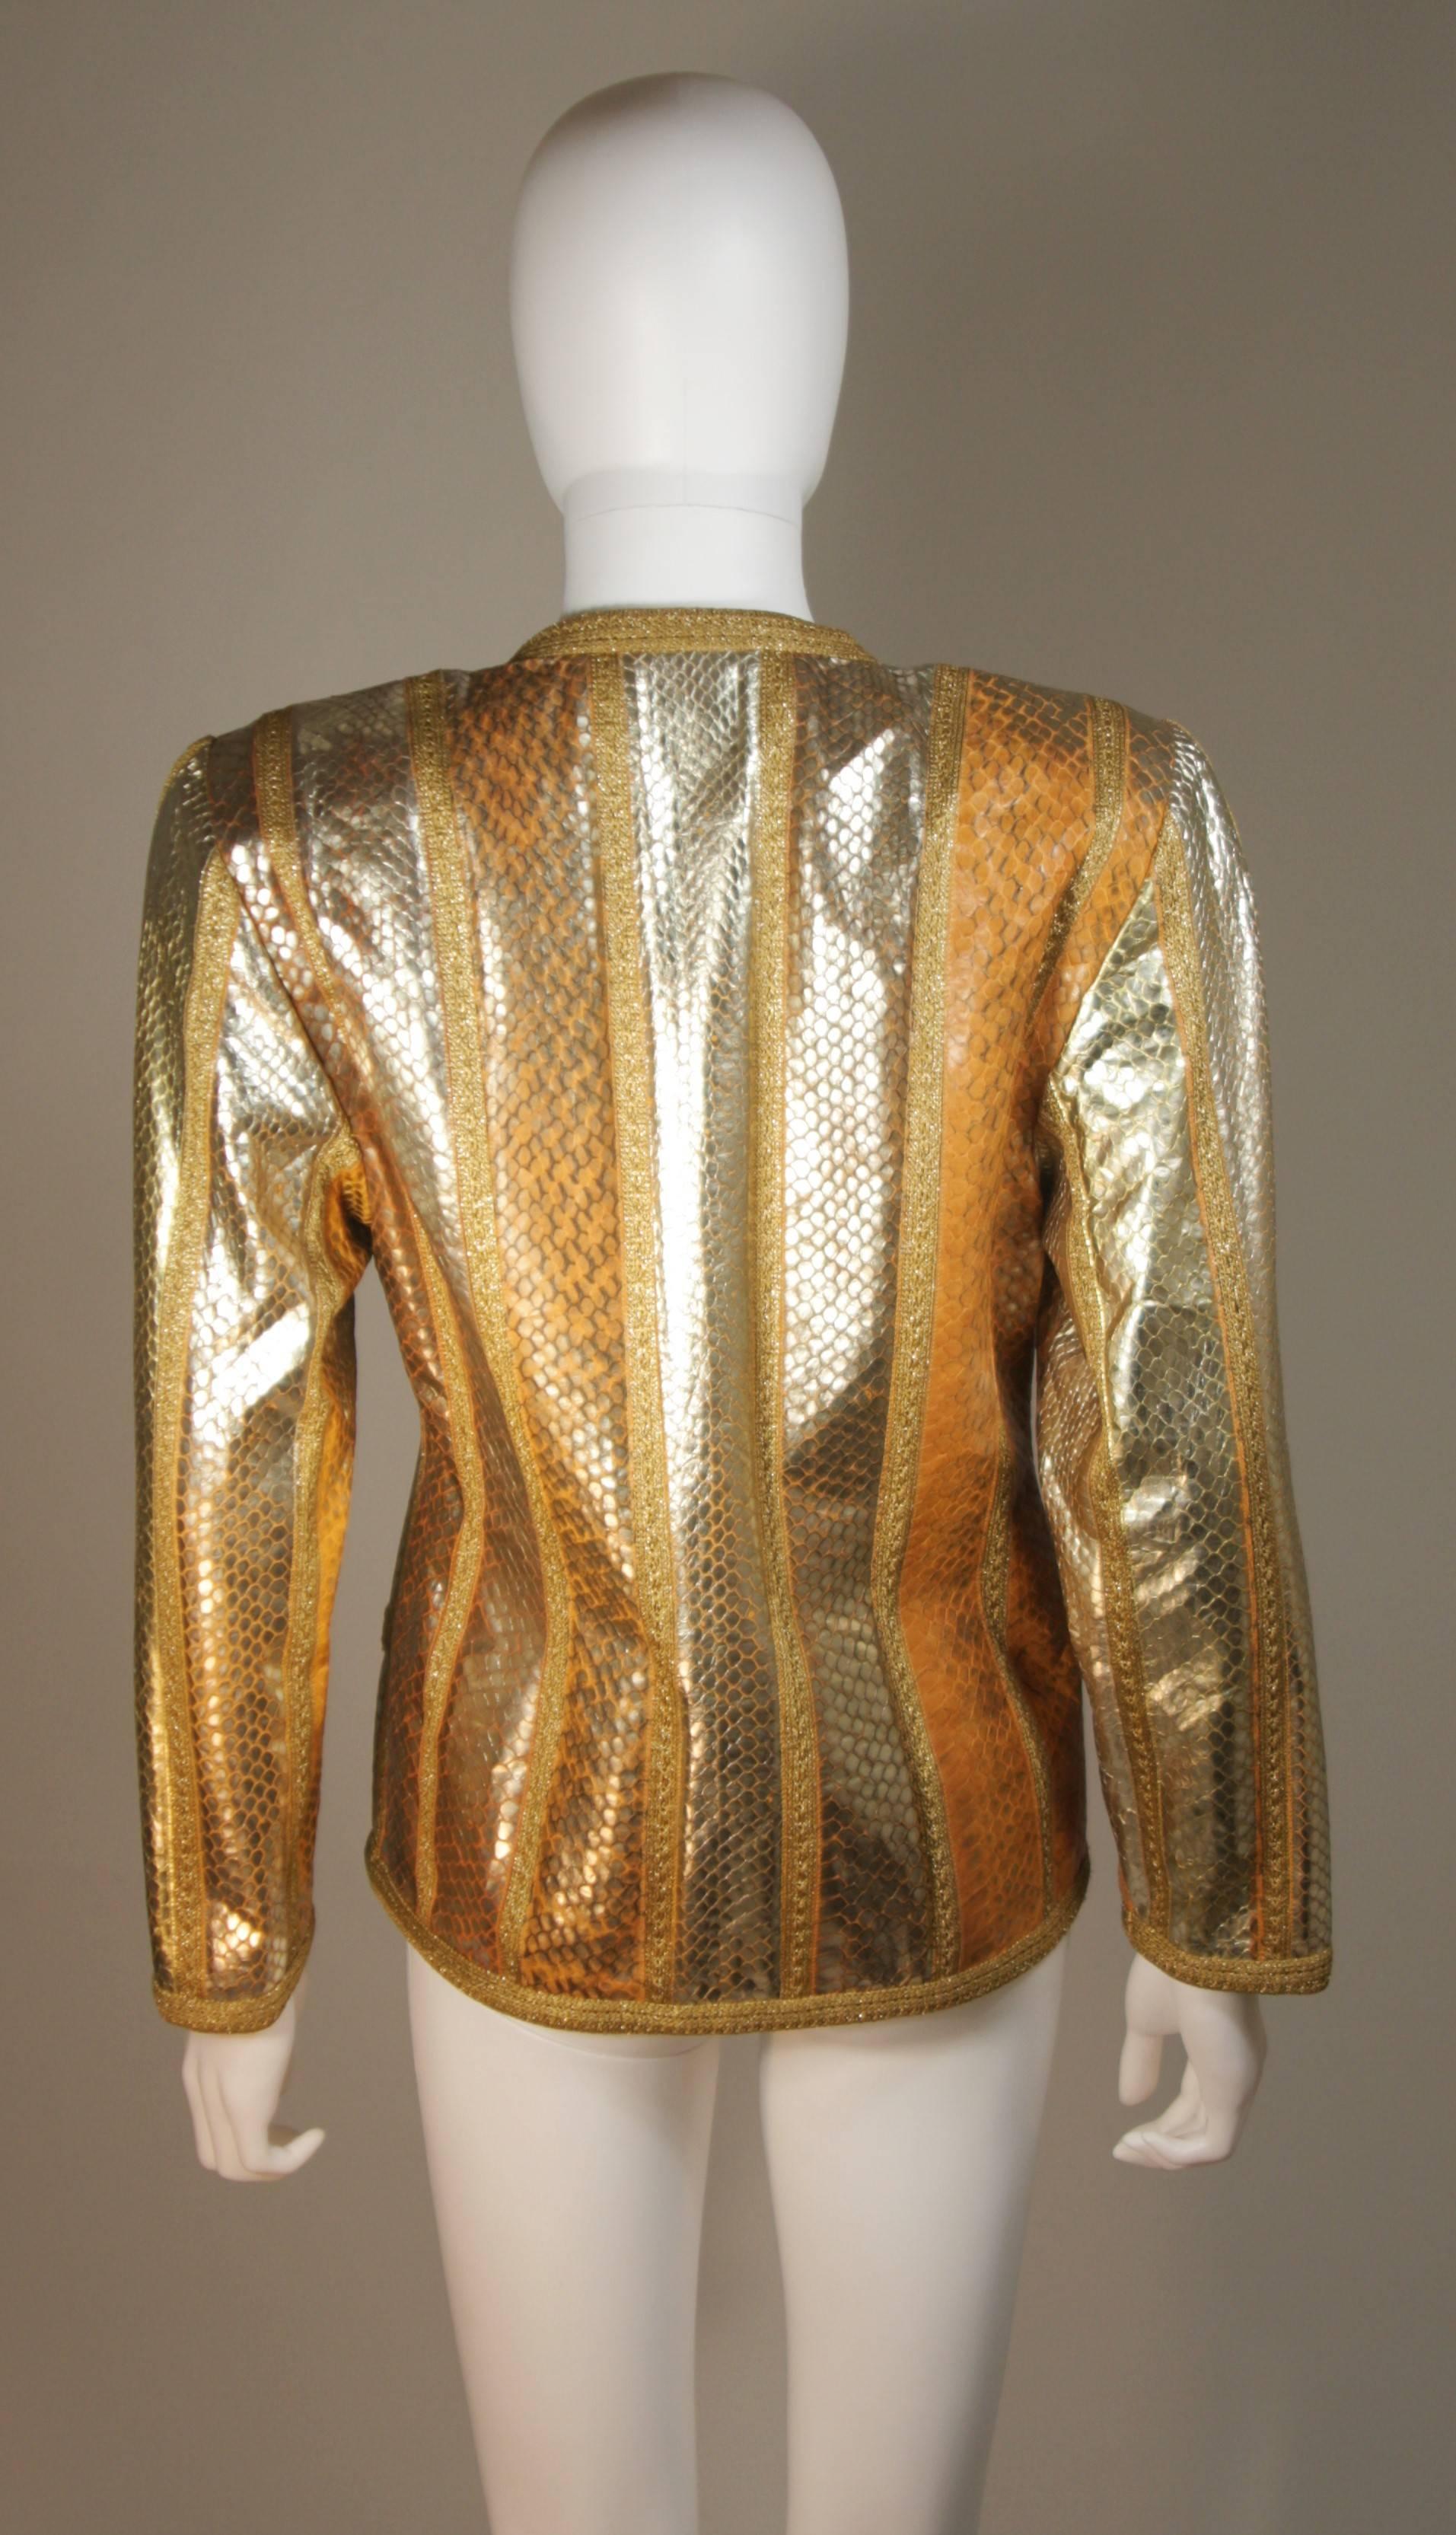 AMEN WARDY Gold Metallic Foiled Snakeskin Jacket with Knit Detailing Size M L In Excellent Condition For Sale In Los Angeles, CA